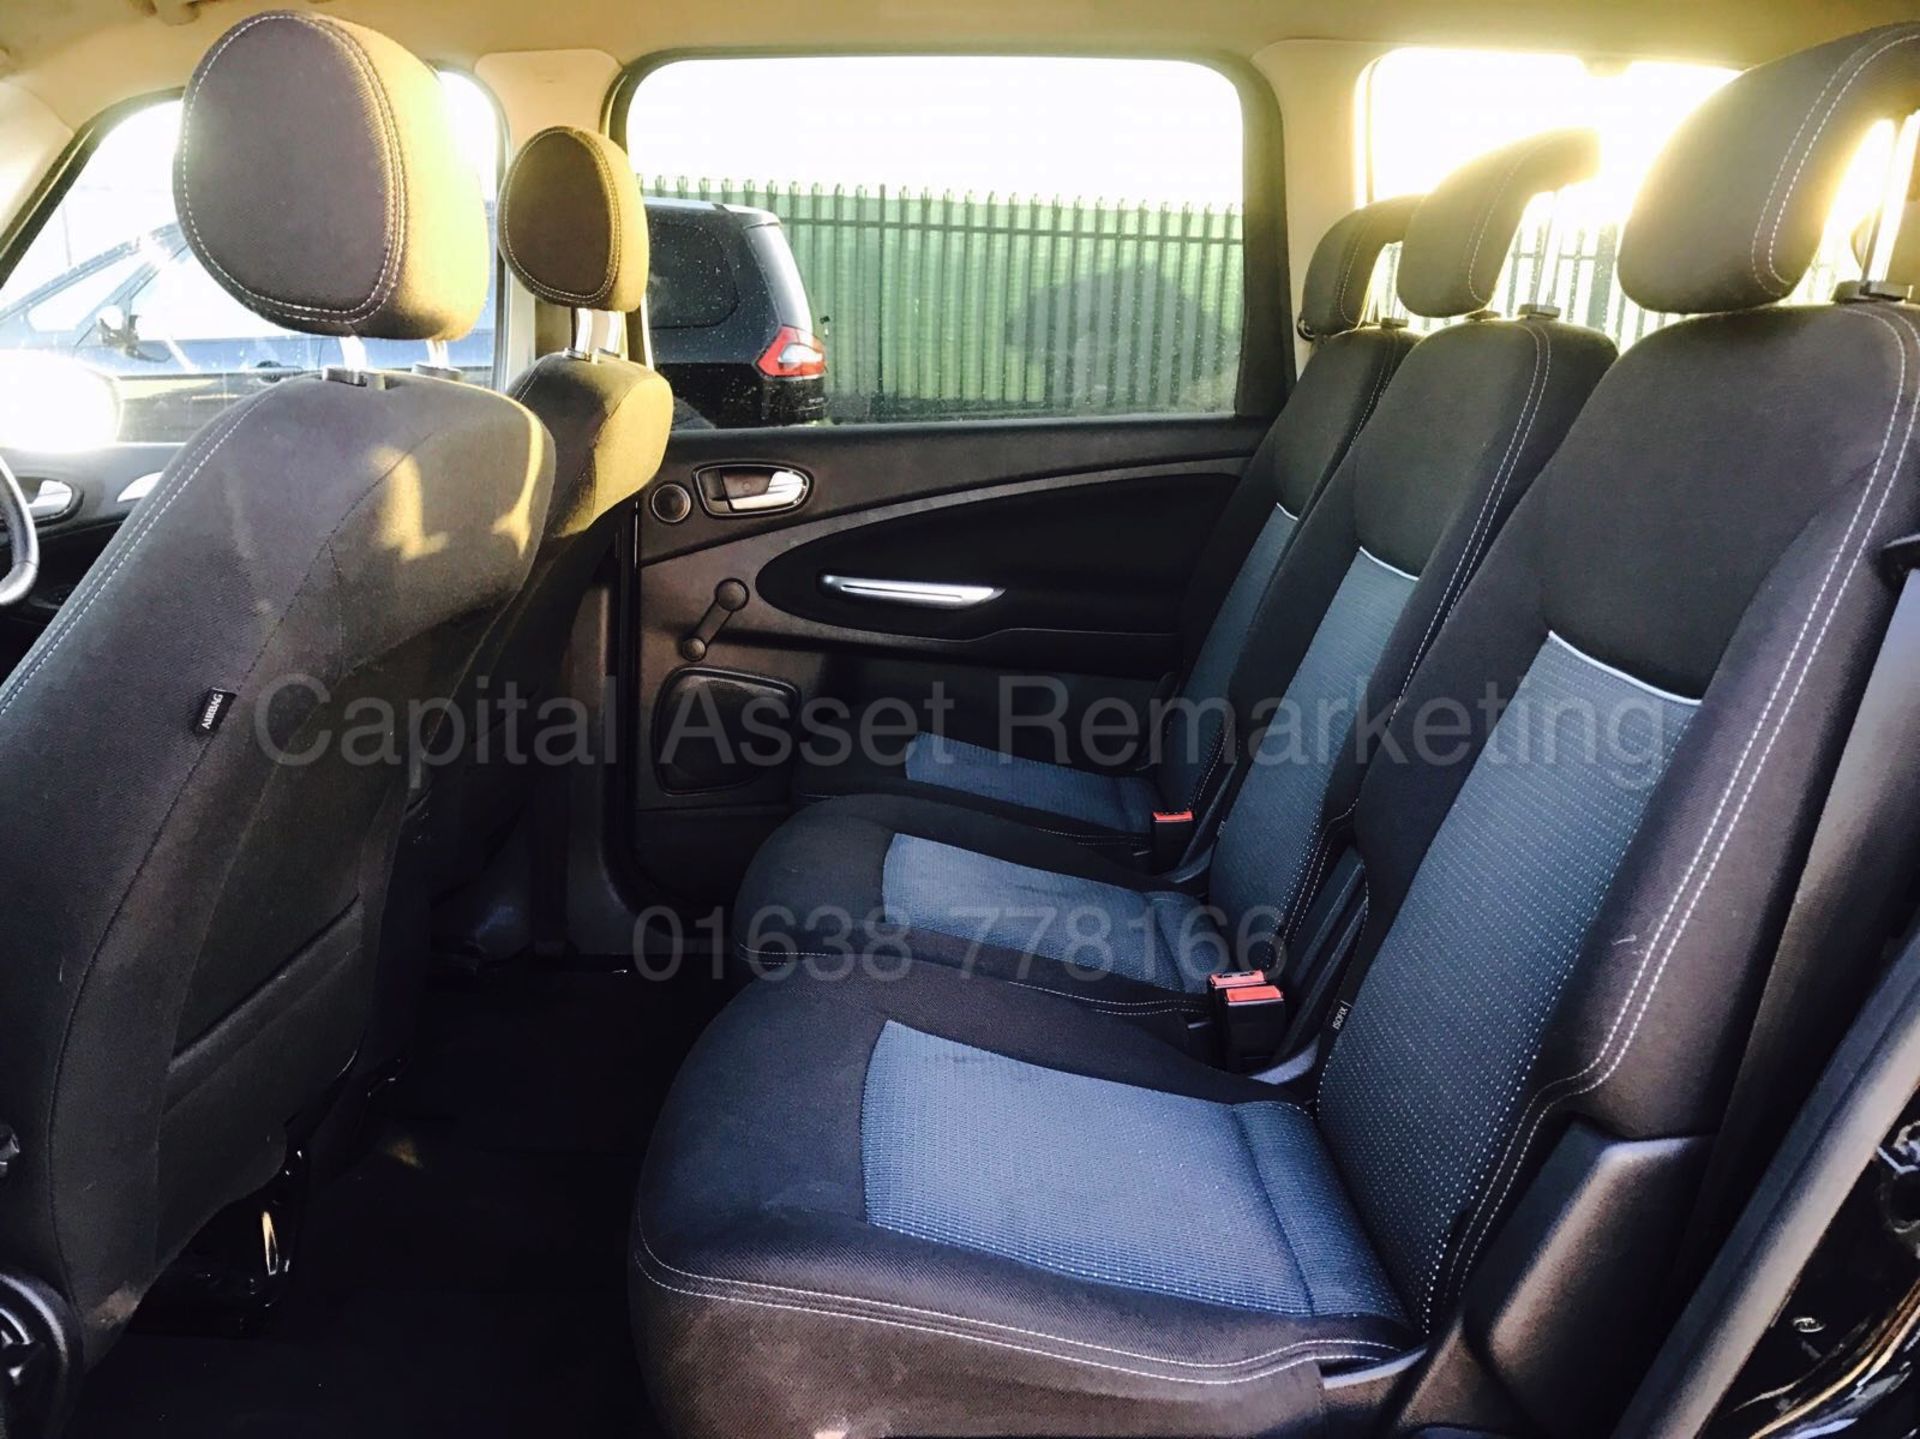 FORD GALAXY 'ZETEC' 7 SEATER (2013 - 13 REG) 2.0 TDCI - 140 BHP POWER SHIFT (1 OWNER) *FULL HISTORY* - Image 9 of 14